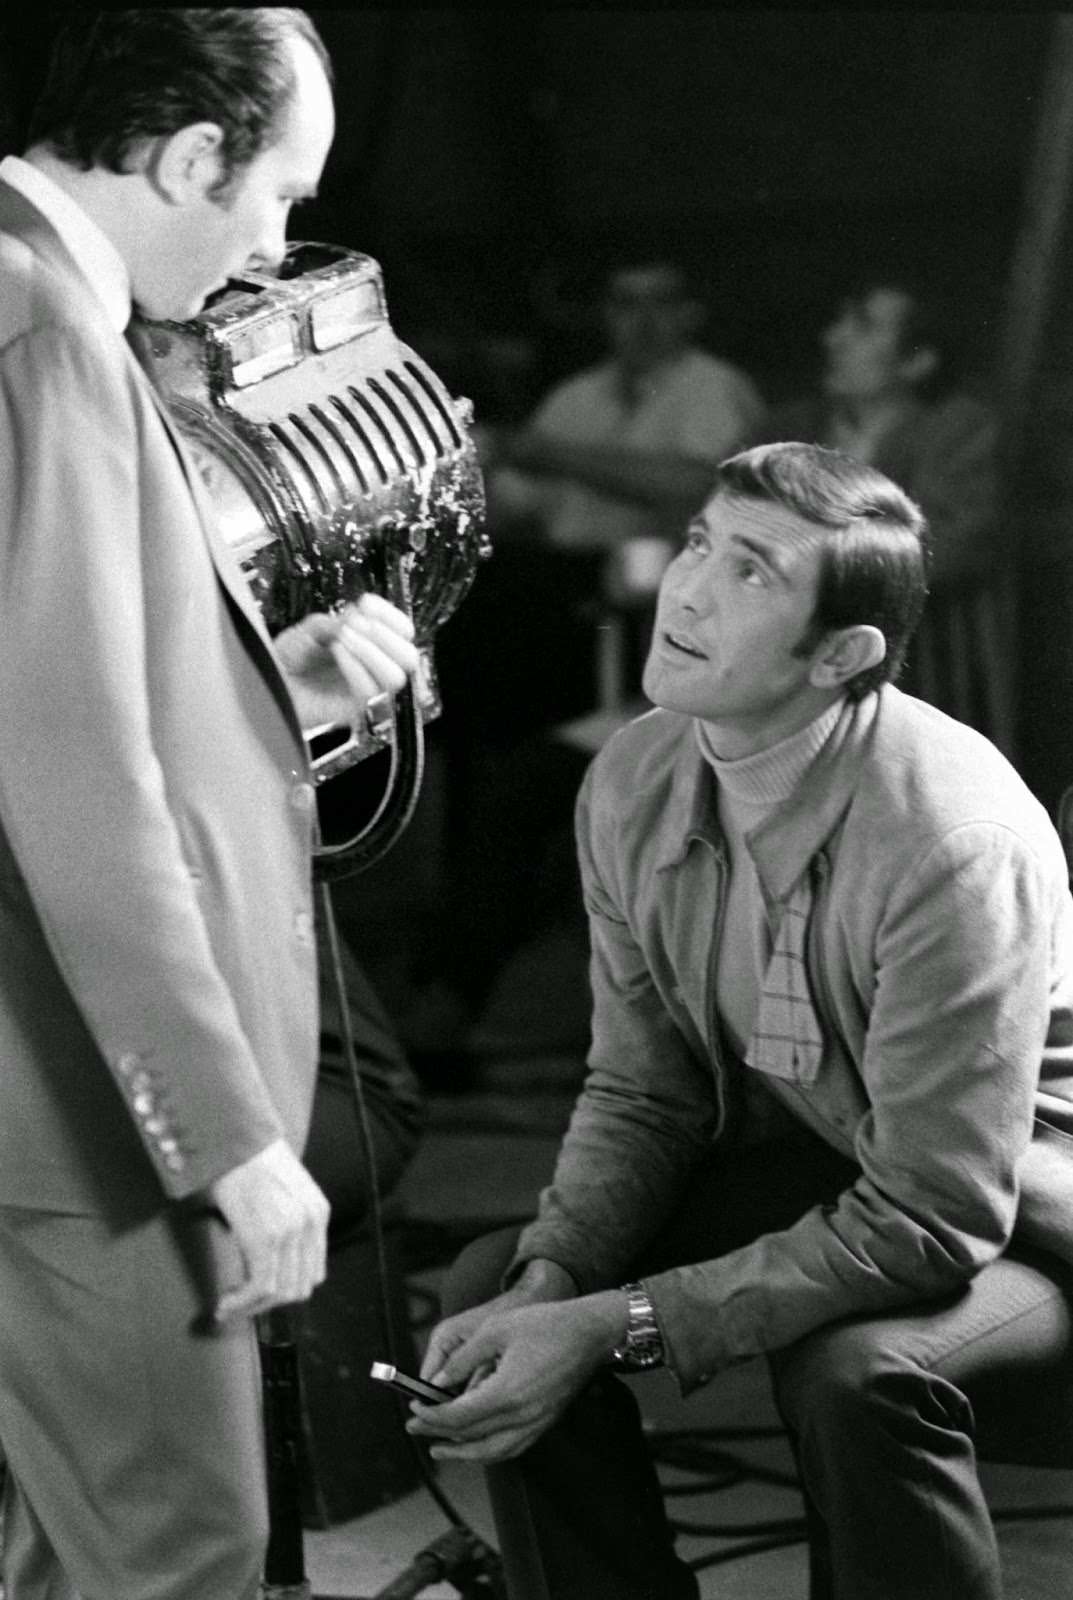 James Bond hopeful George Lazenby fiddles with a knife while chatting with Bond director Peter R. Hunt, 1967.